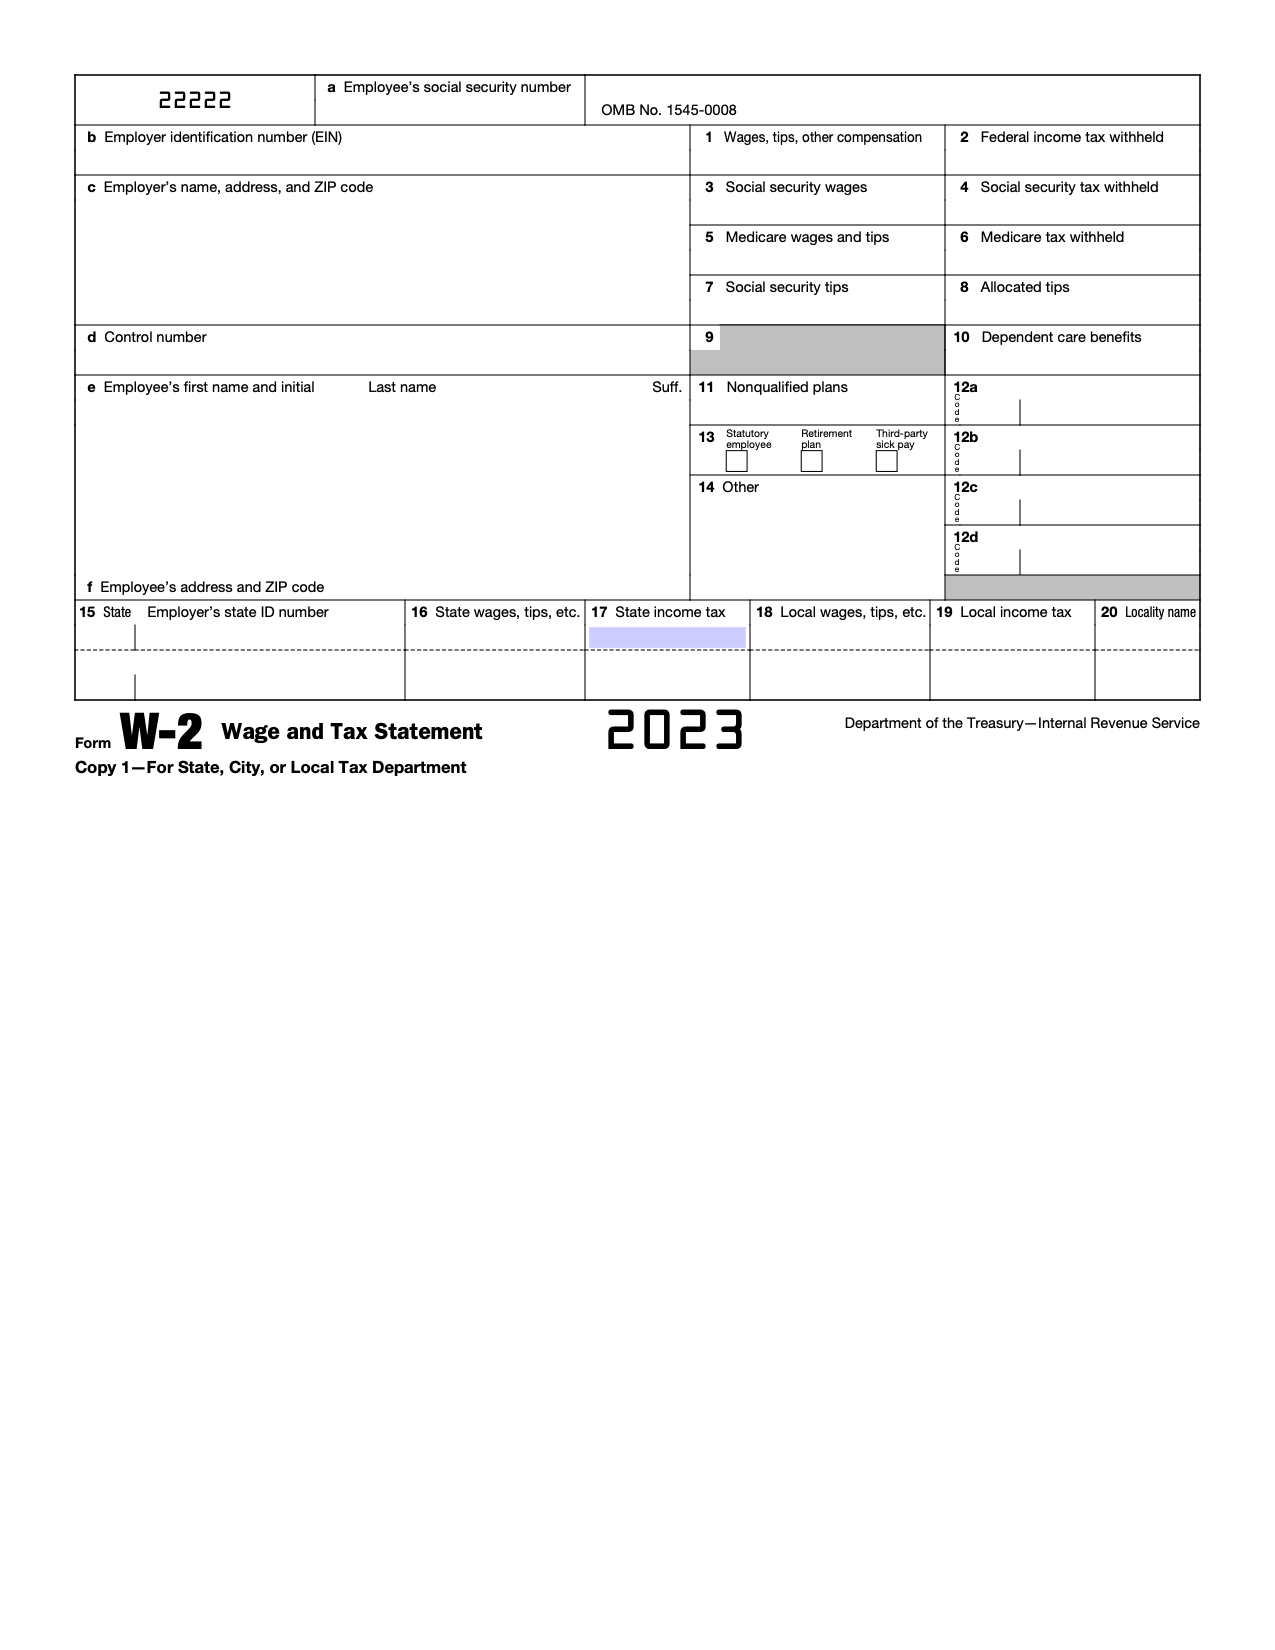 Free Irs Form W-2 | Wage And Tax Statement - Pdf – Eforms throughout W2 Form 2024 Pdf Printable